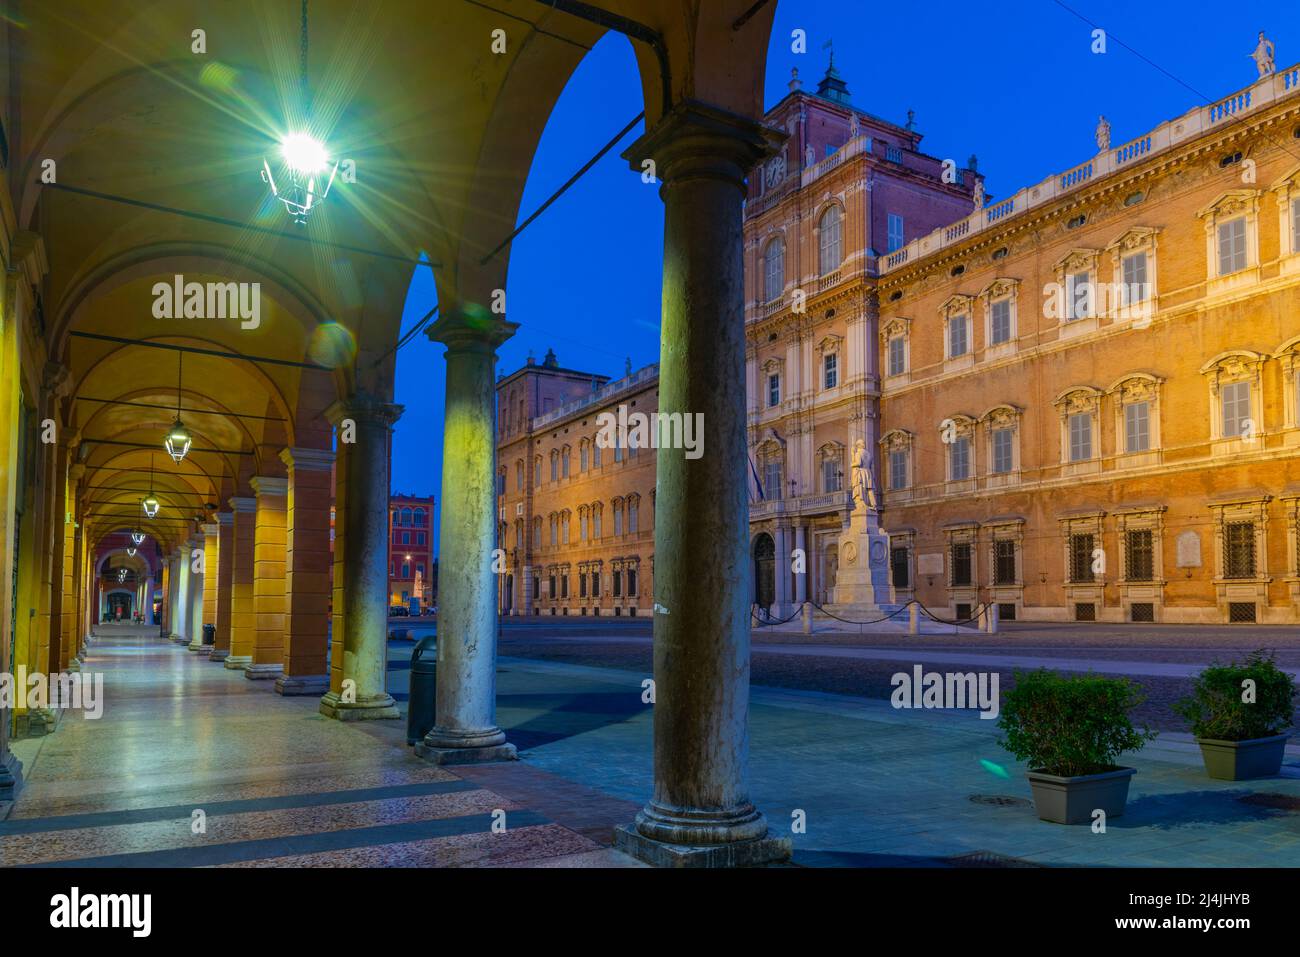 Sunrise view of Palazzo Ducale through an arcade in Italian town Modena. Stock Photo